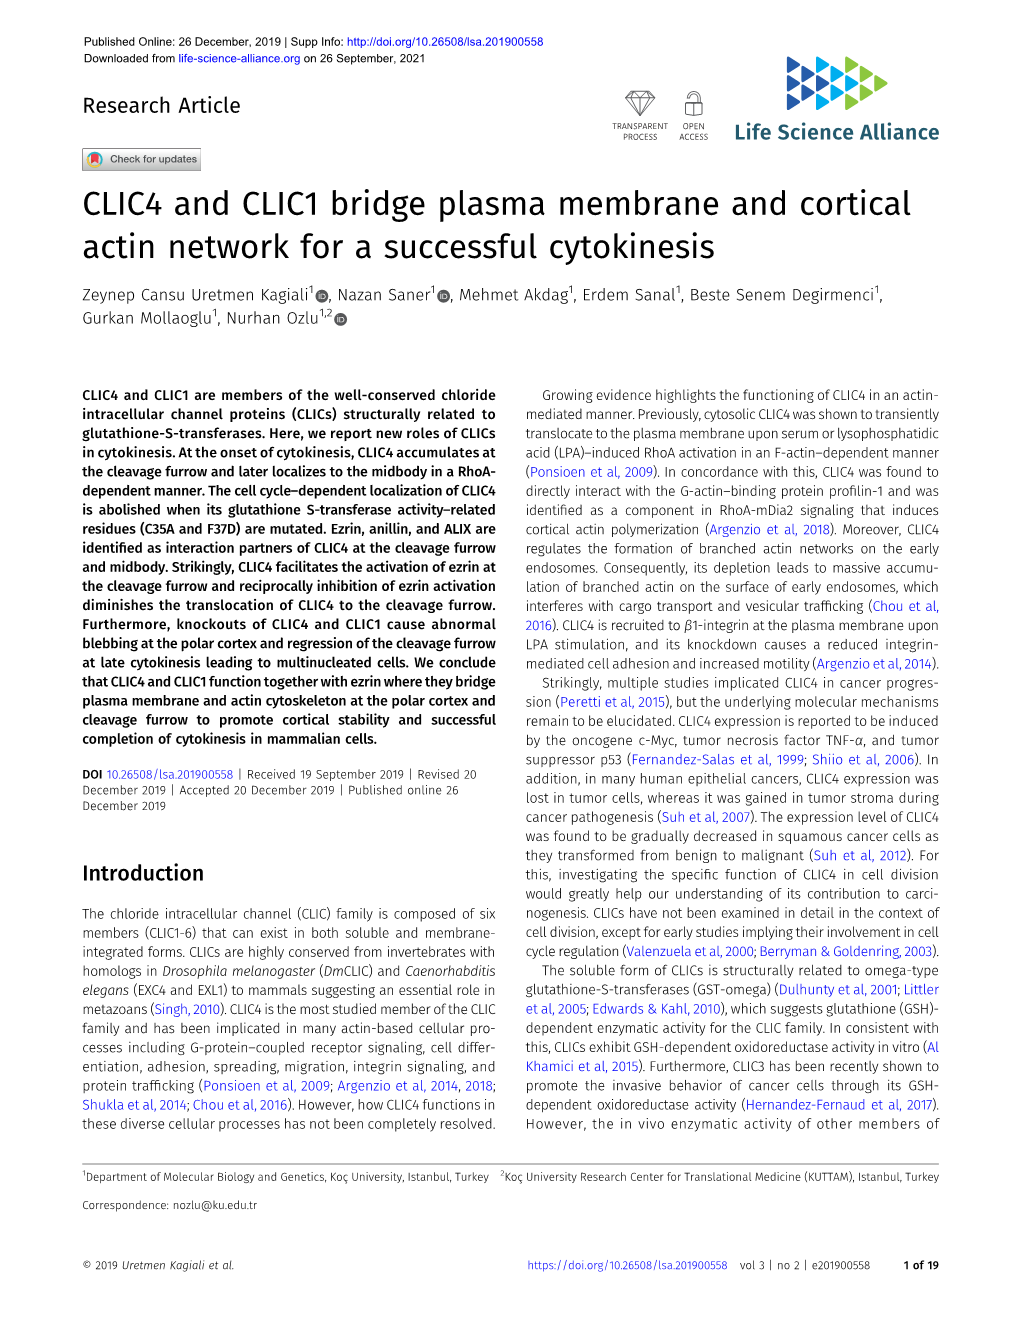 CLIC4 and CLIC1 Bridge Plasma Membrane and Cortical Actin Network for a Successful Cytokinesis